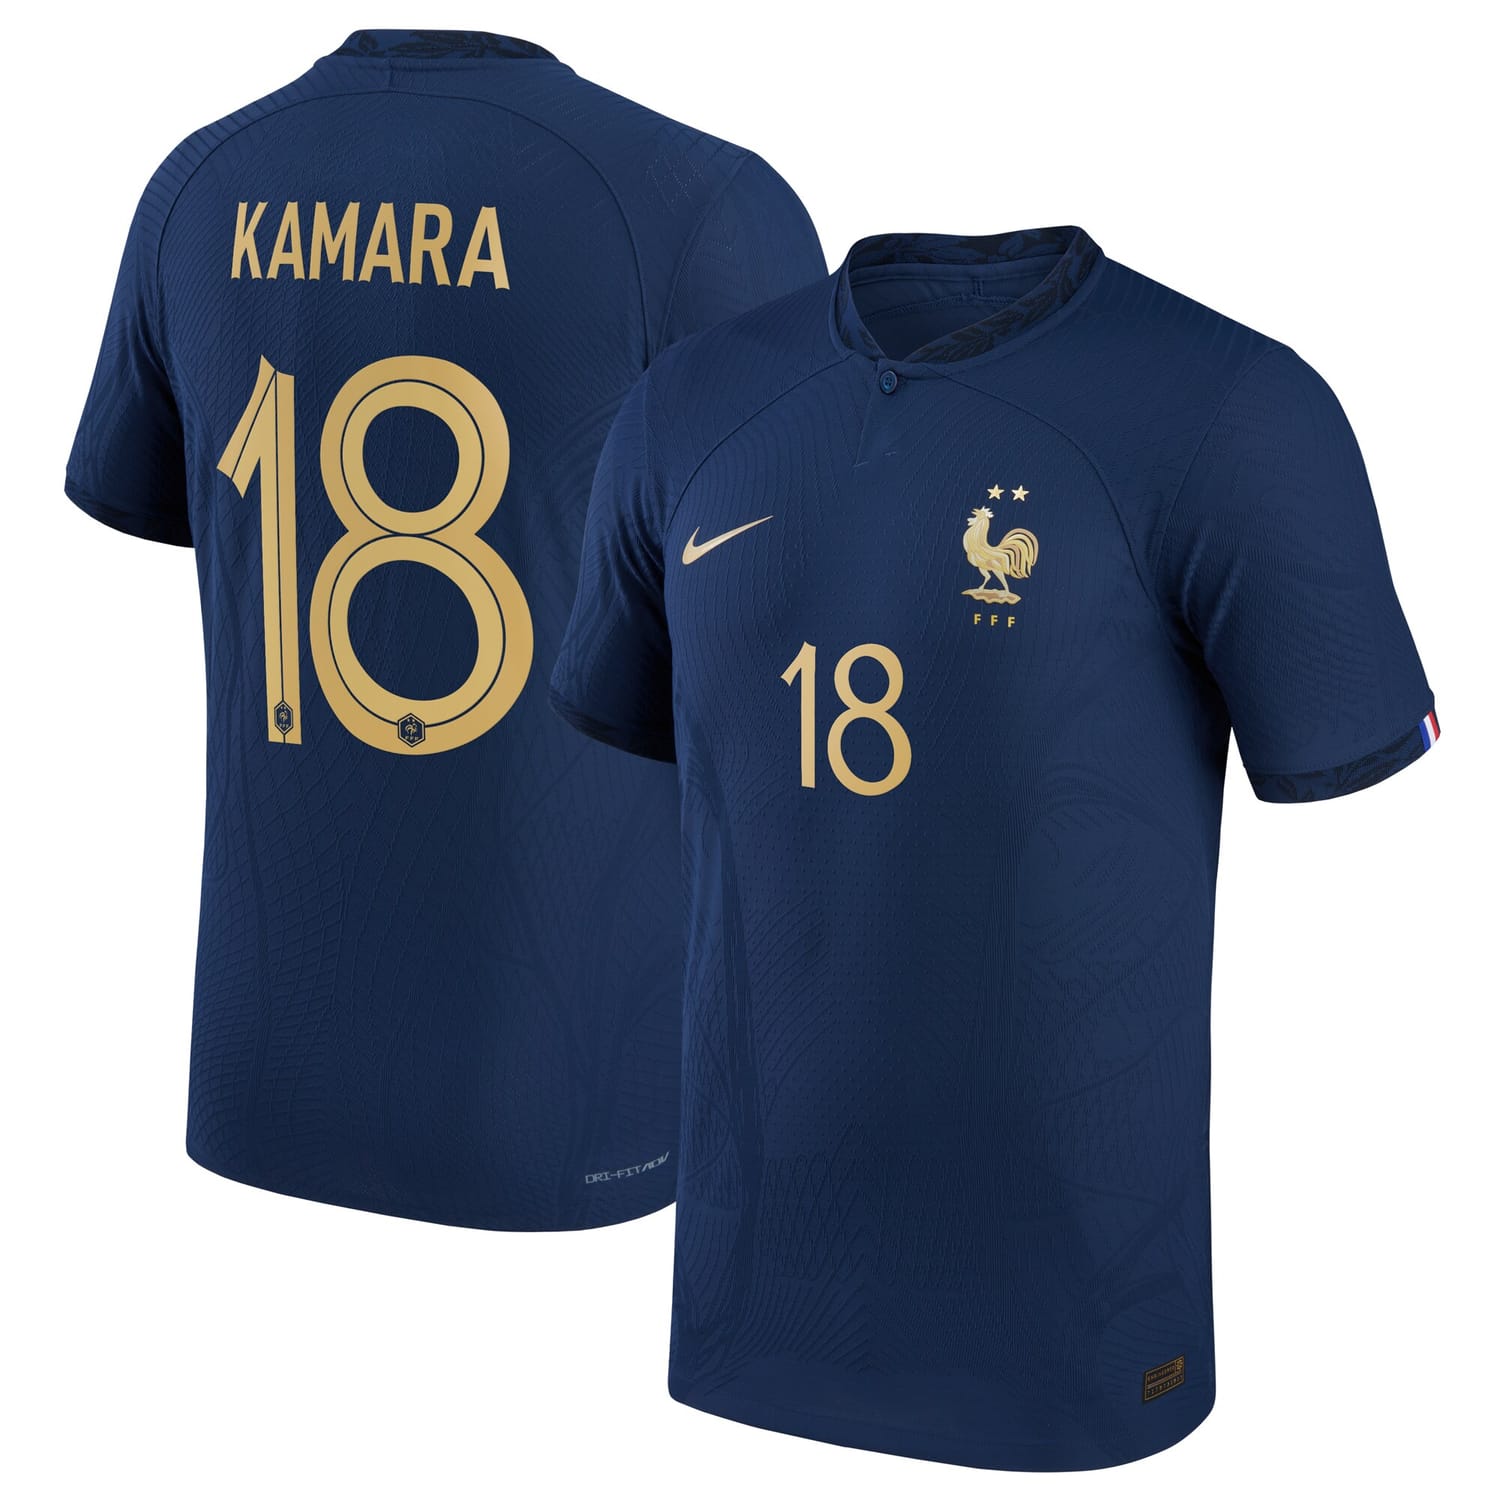 France National Team Home Authentic Jersey Shirt 2022 player Kamara 18 printing for Men